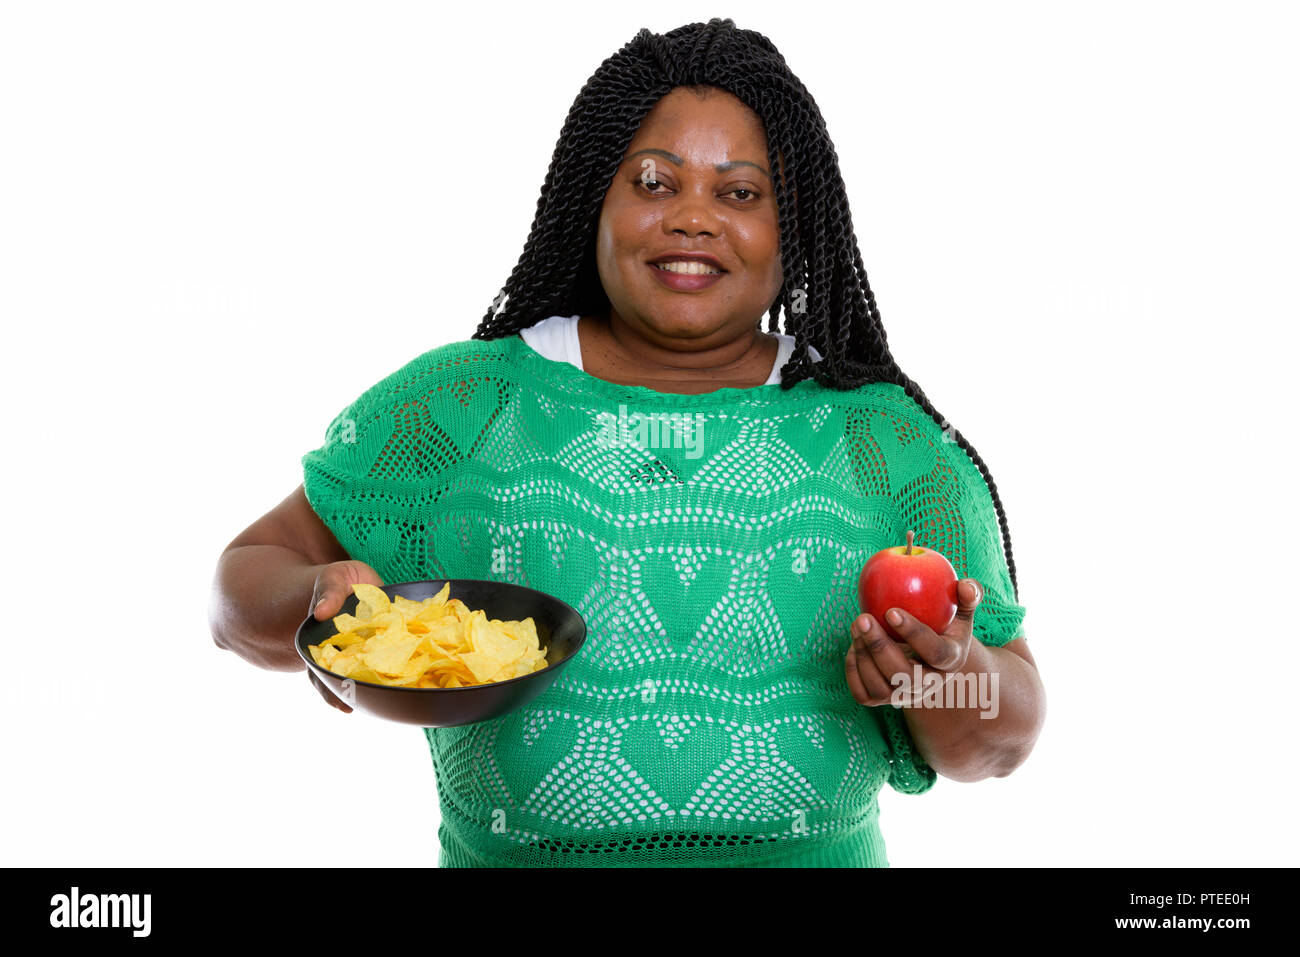 Studio shot of happy fat black African woman smiling while holdi Banque D'Images